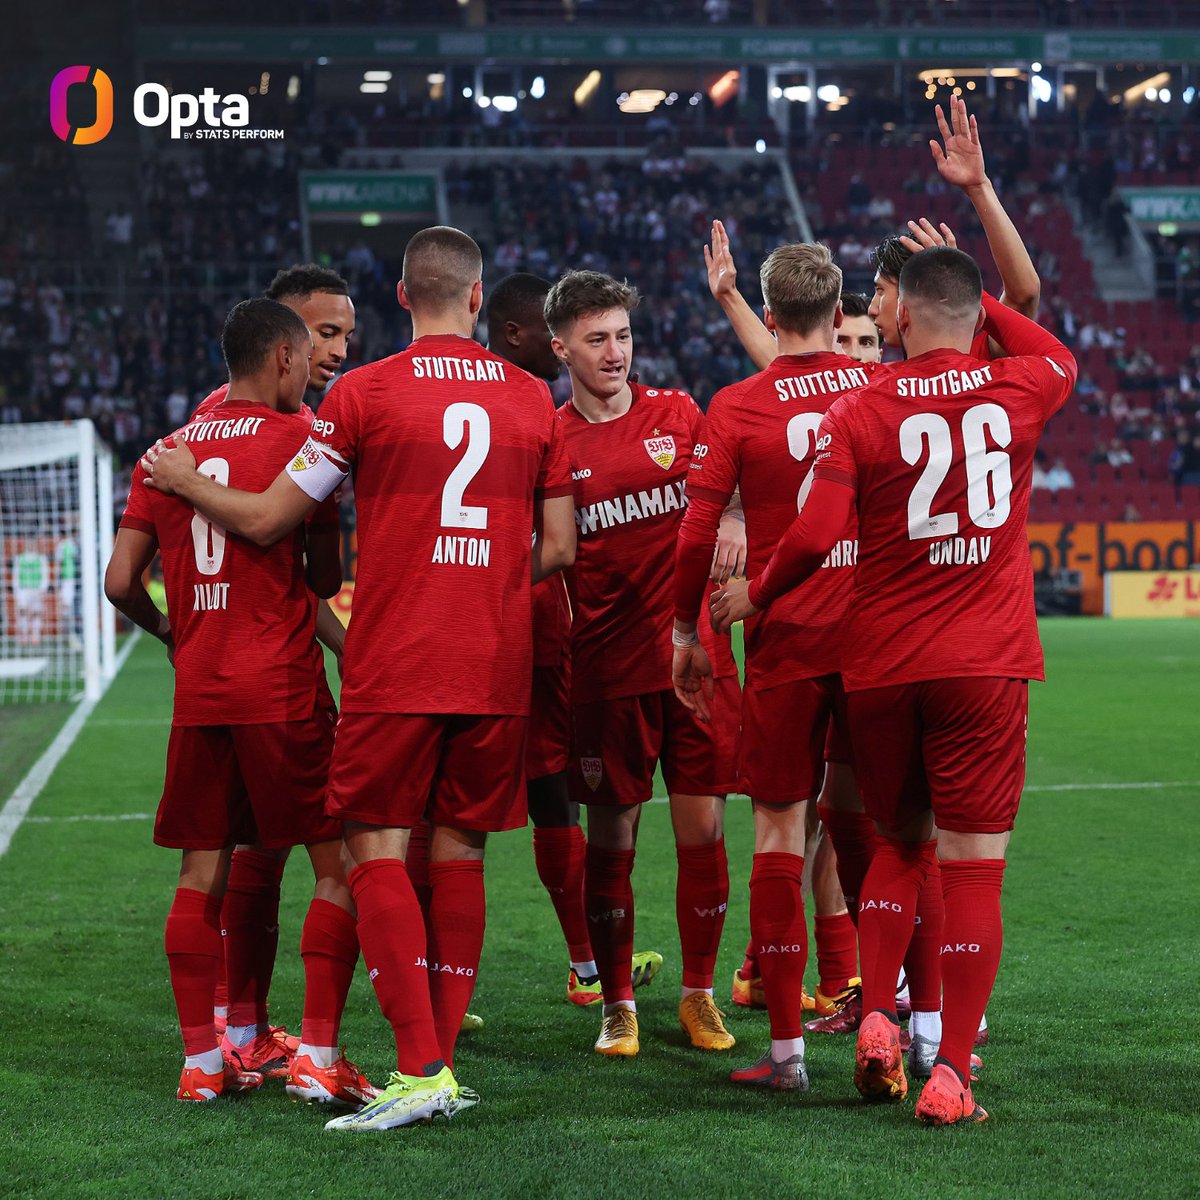 22 - VfB Stuttgart have won their 22nd match in the Bundesliga this season, setting a new club record - never before did they manage to win this many matches in one season in the competition. Soaring. #FCAVfB